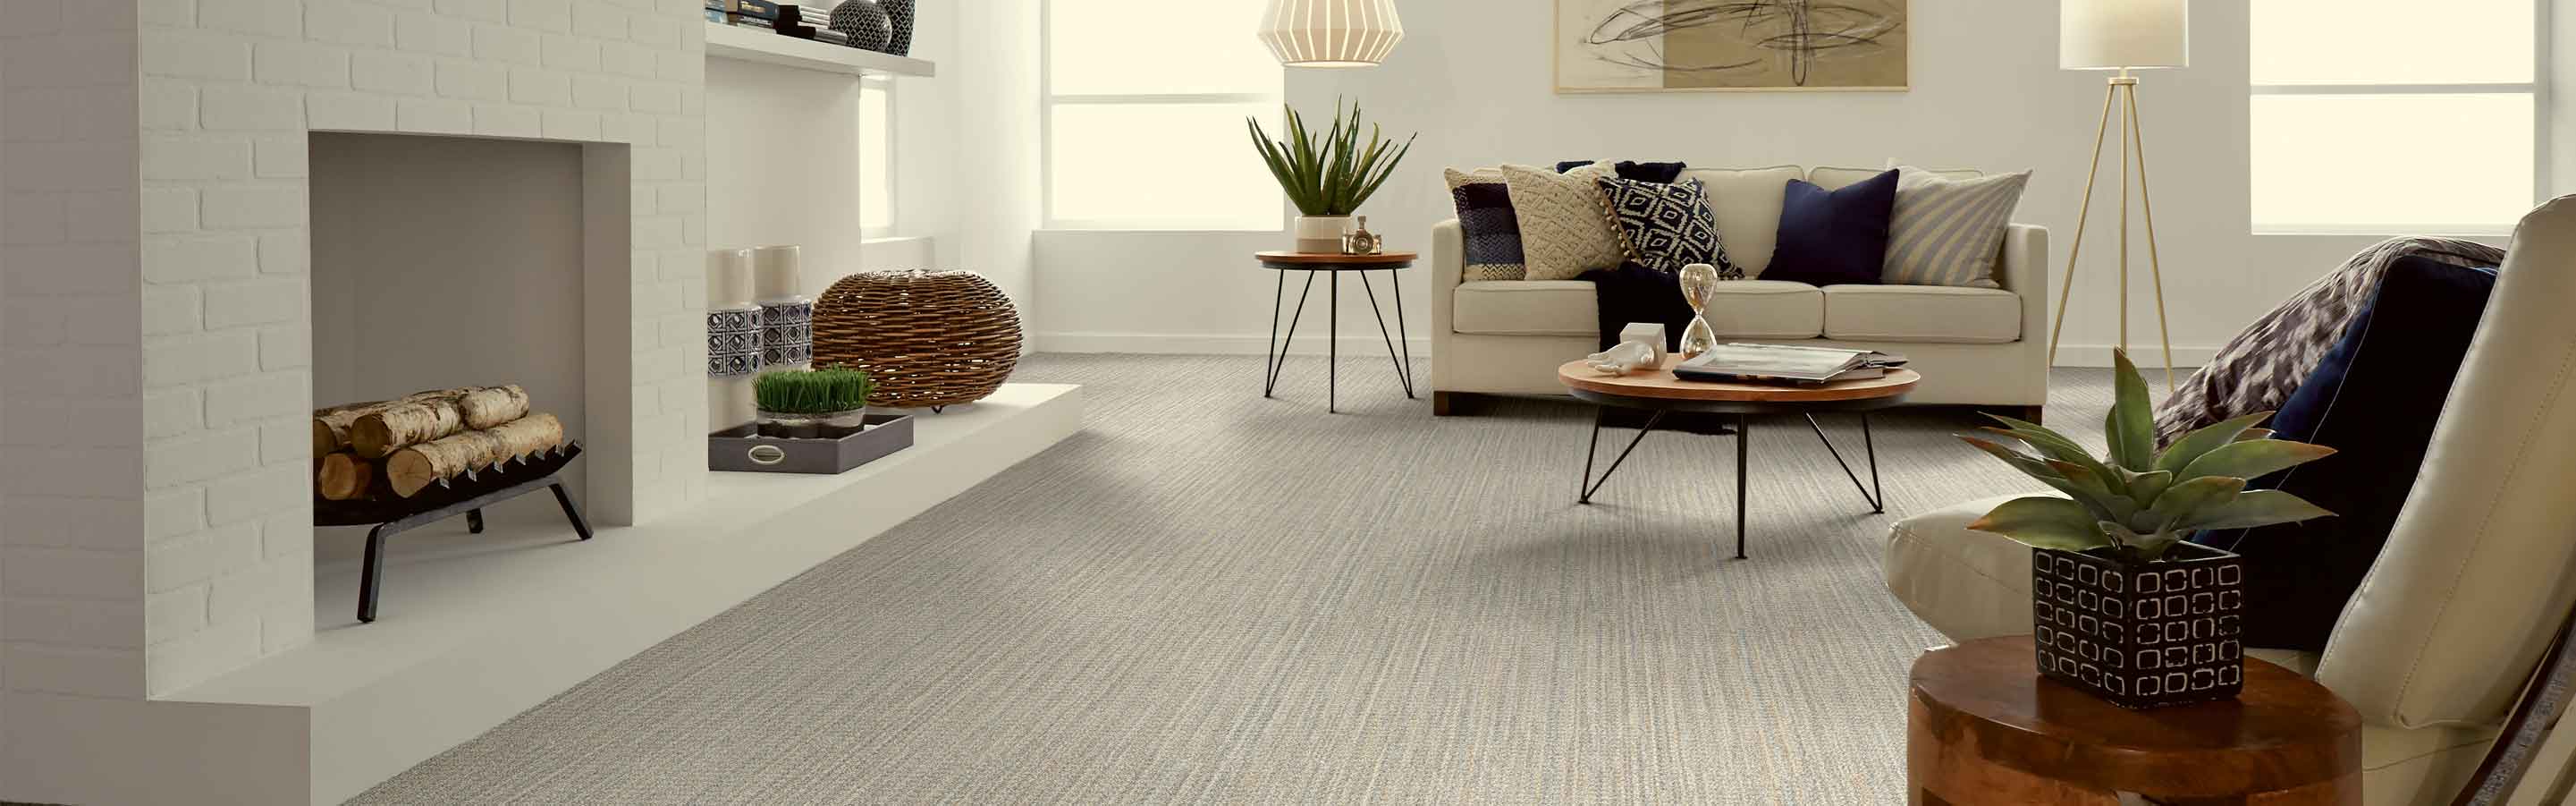 gray carpet in a living room